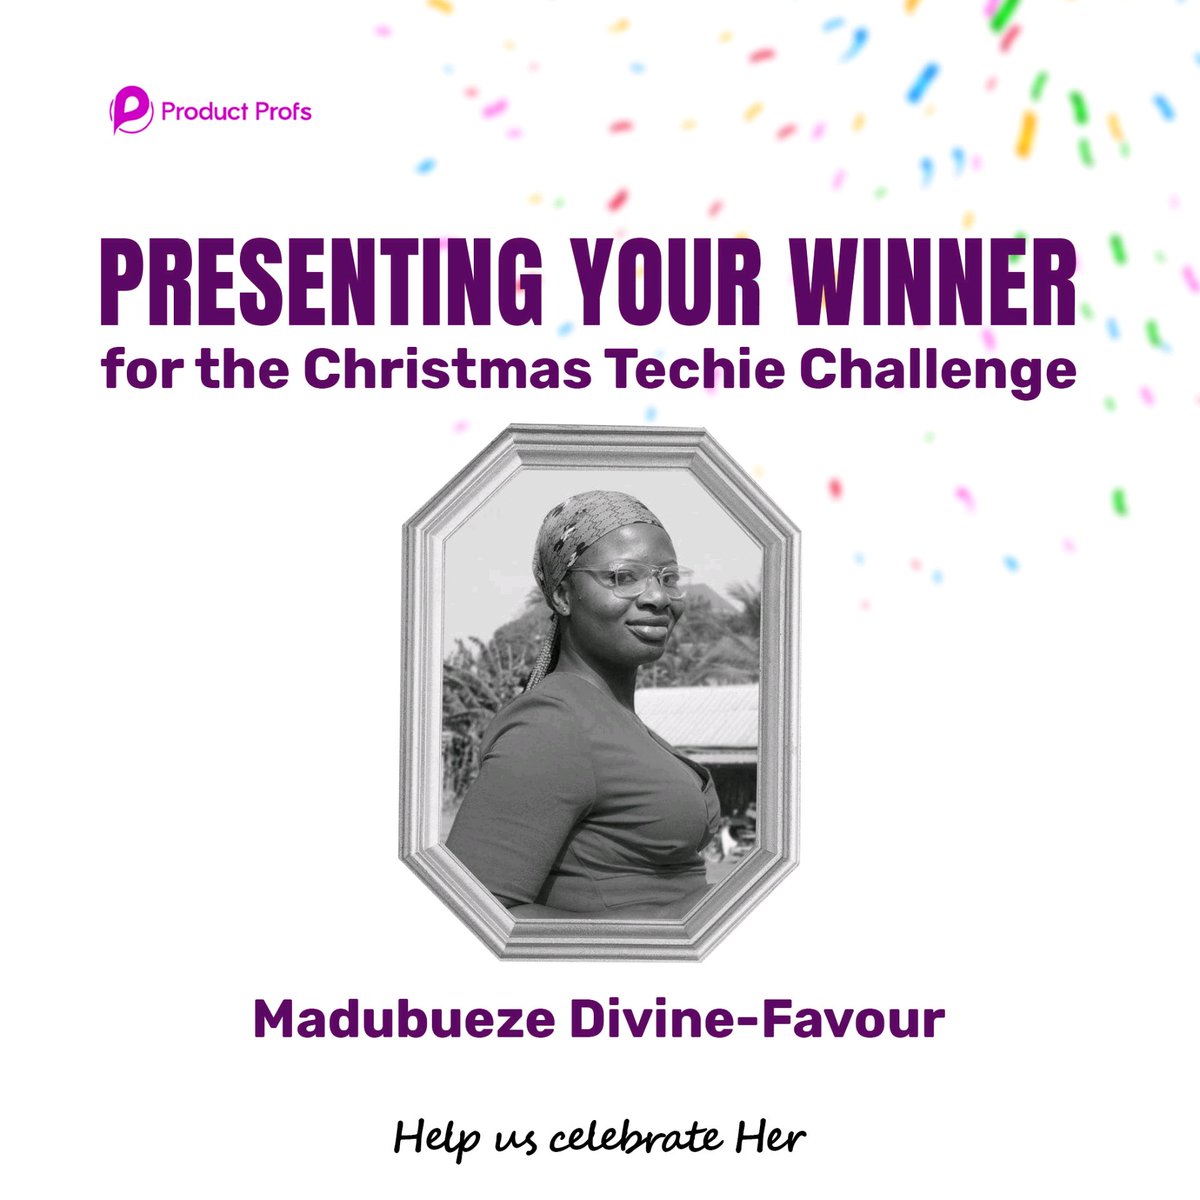 Congratulations to you, Ma on winning yourself a Fully Funded scholarship and Data allowance for your learning journey to becoming a product manager !

#ProductManagement #TechRevolution #NoCodeSkills #Productprofs #Christmasgiveaway #Techgiveaway